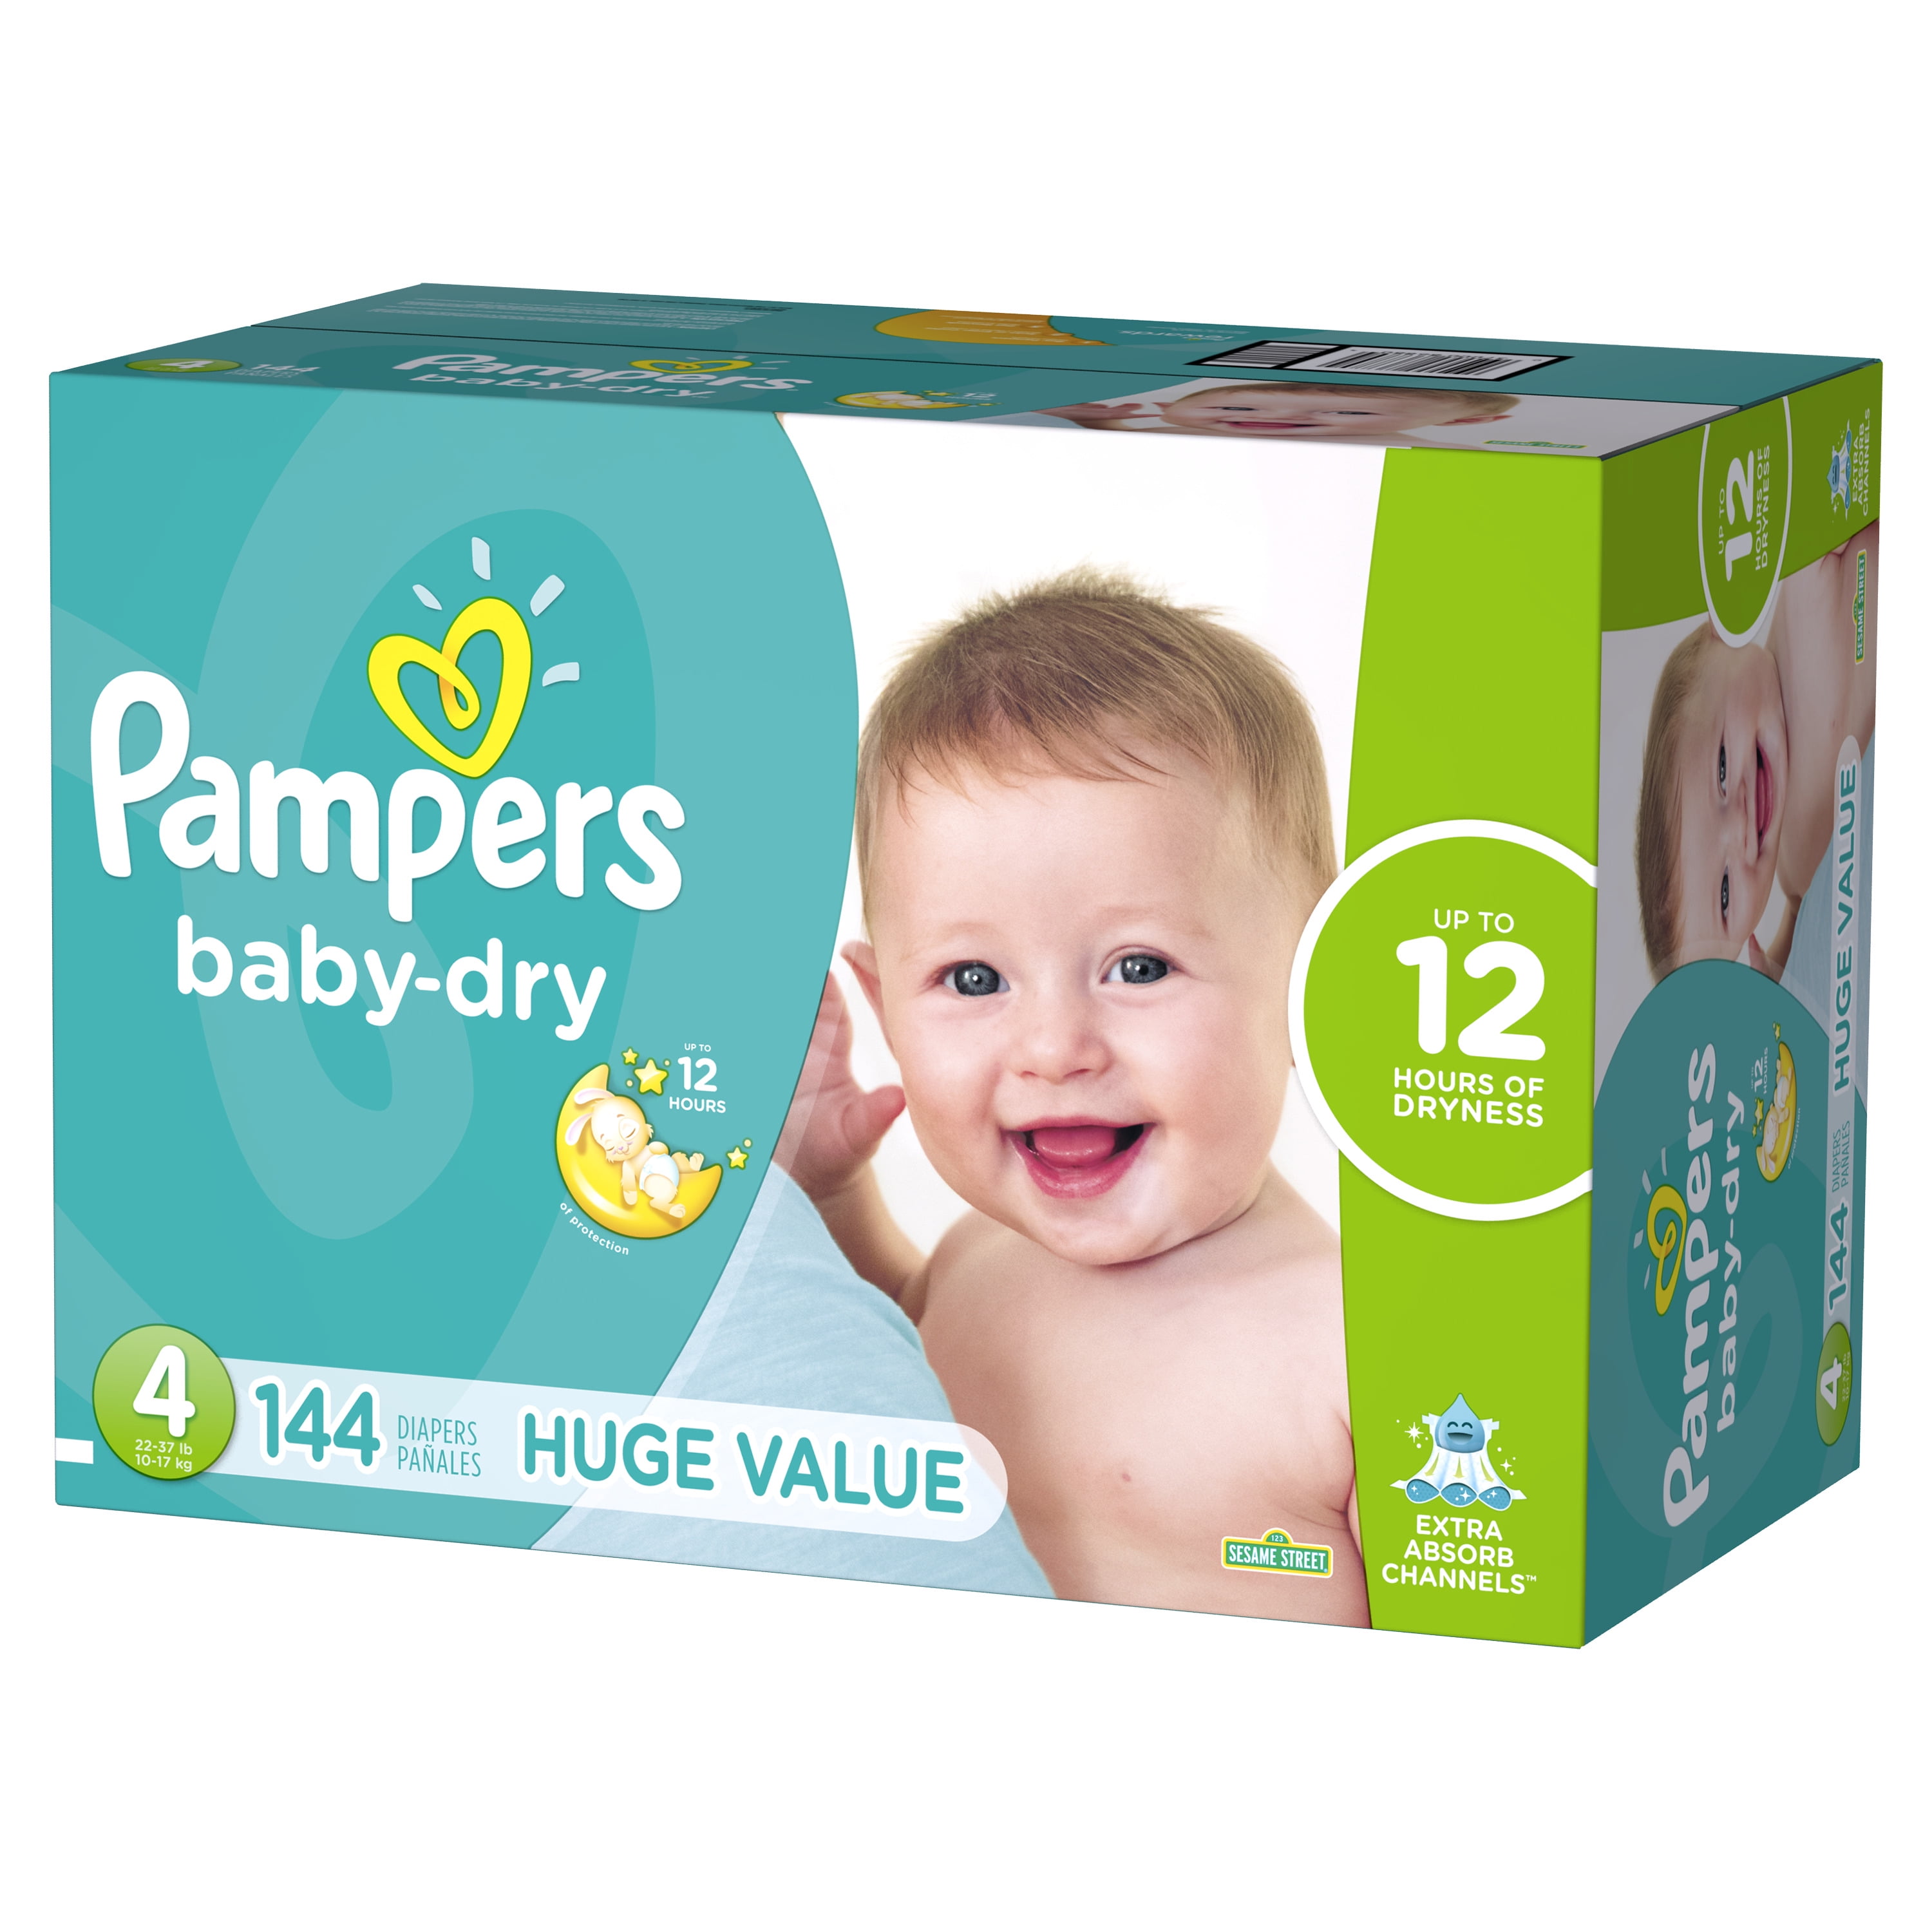 Pampers Baby-Dry Diapers Size 4 Count Walmart.com